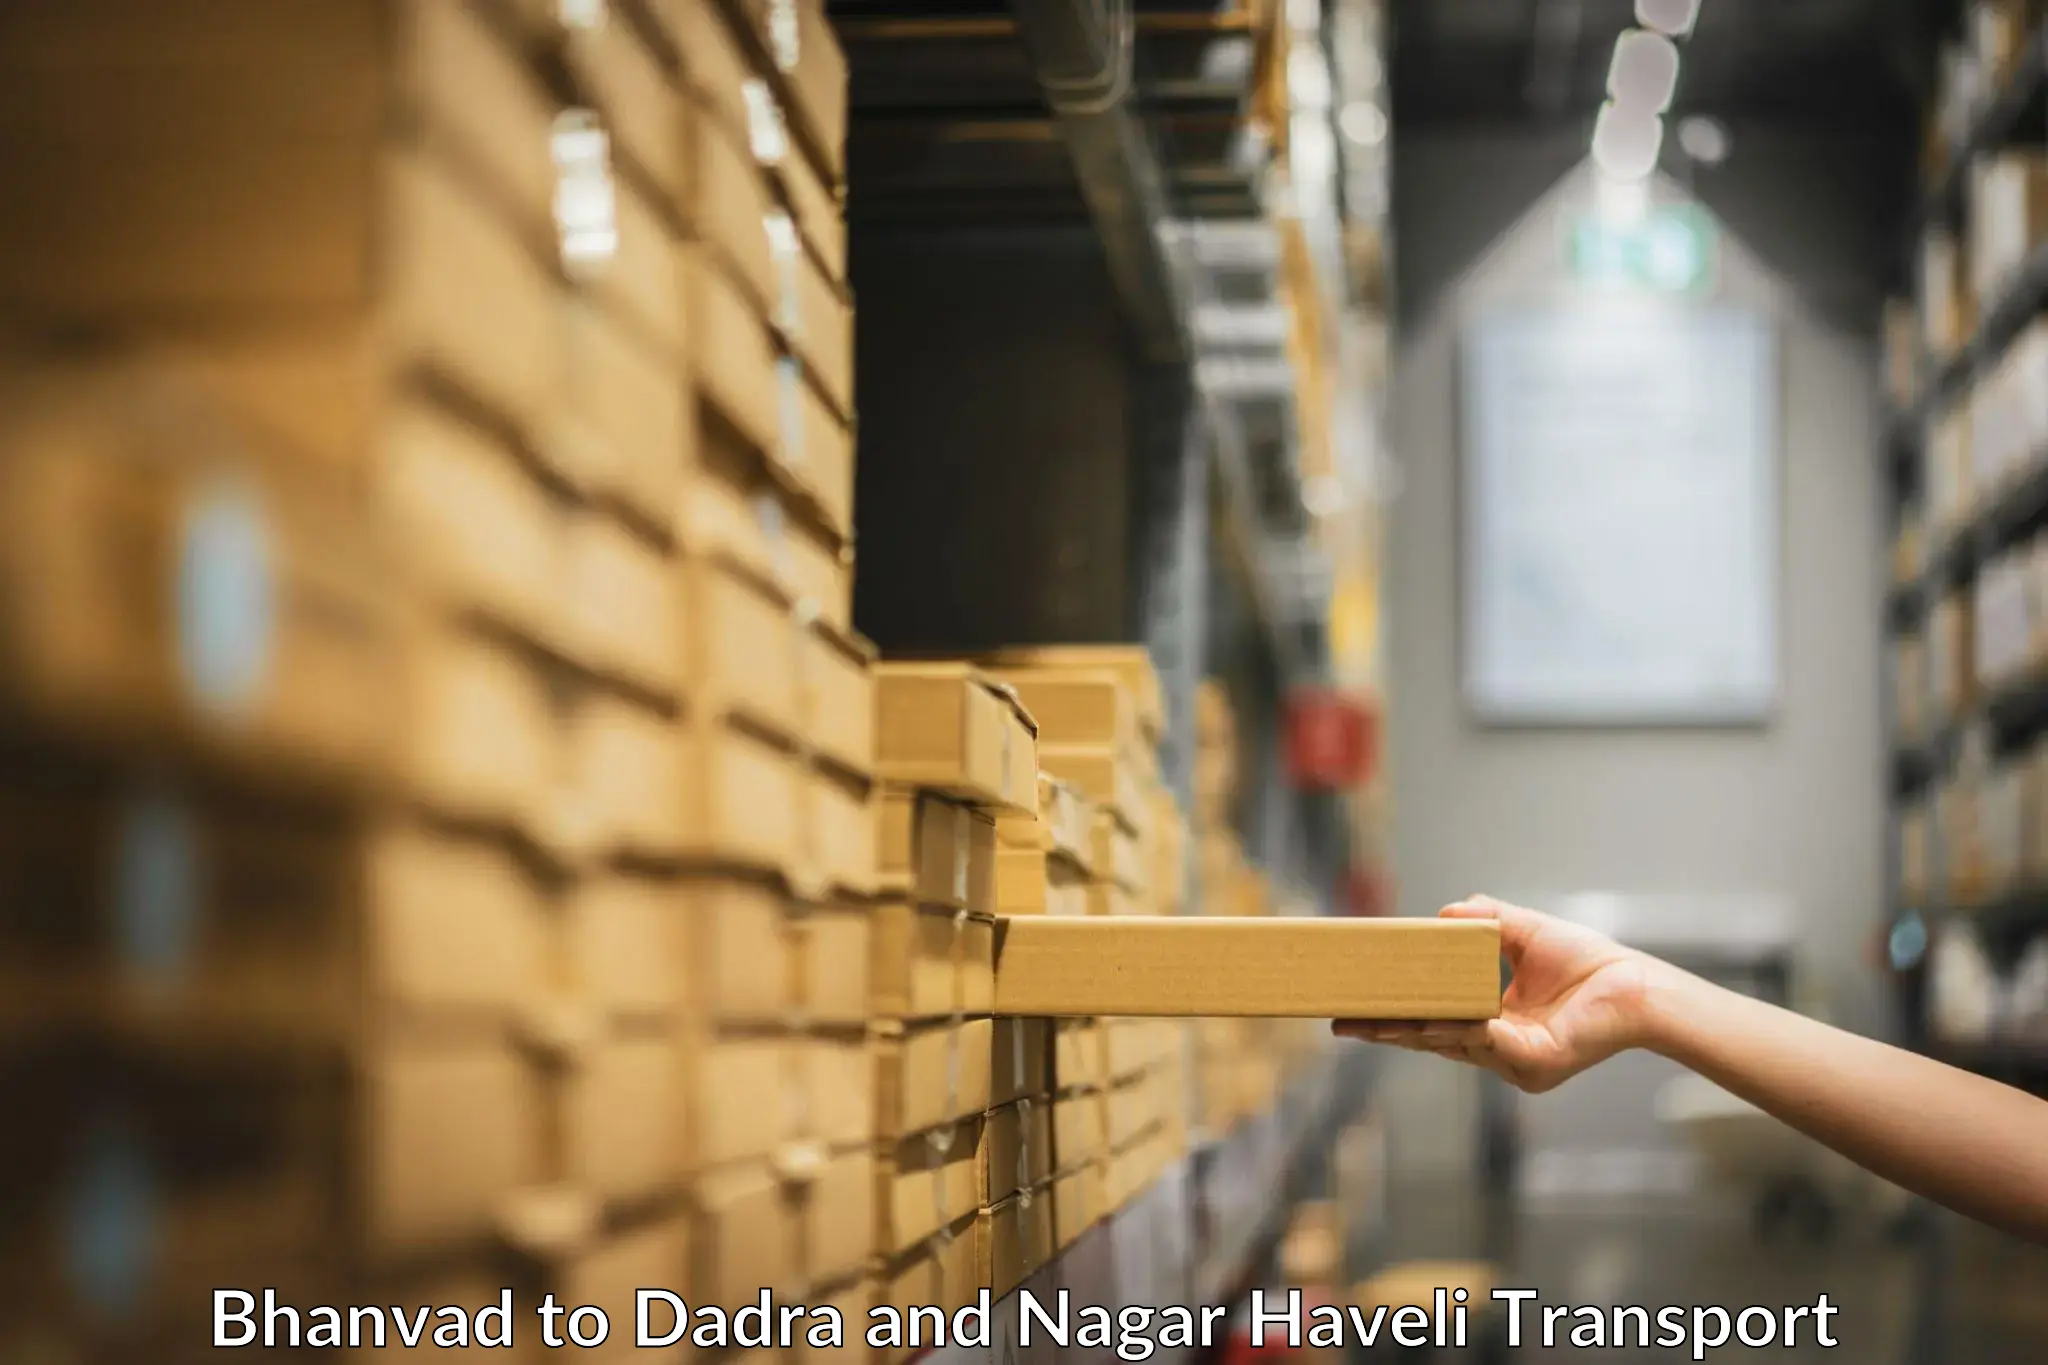 Daily parcel service transport Bhanvad to Dadra and Nagar Haveli